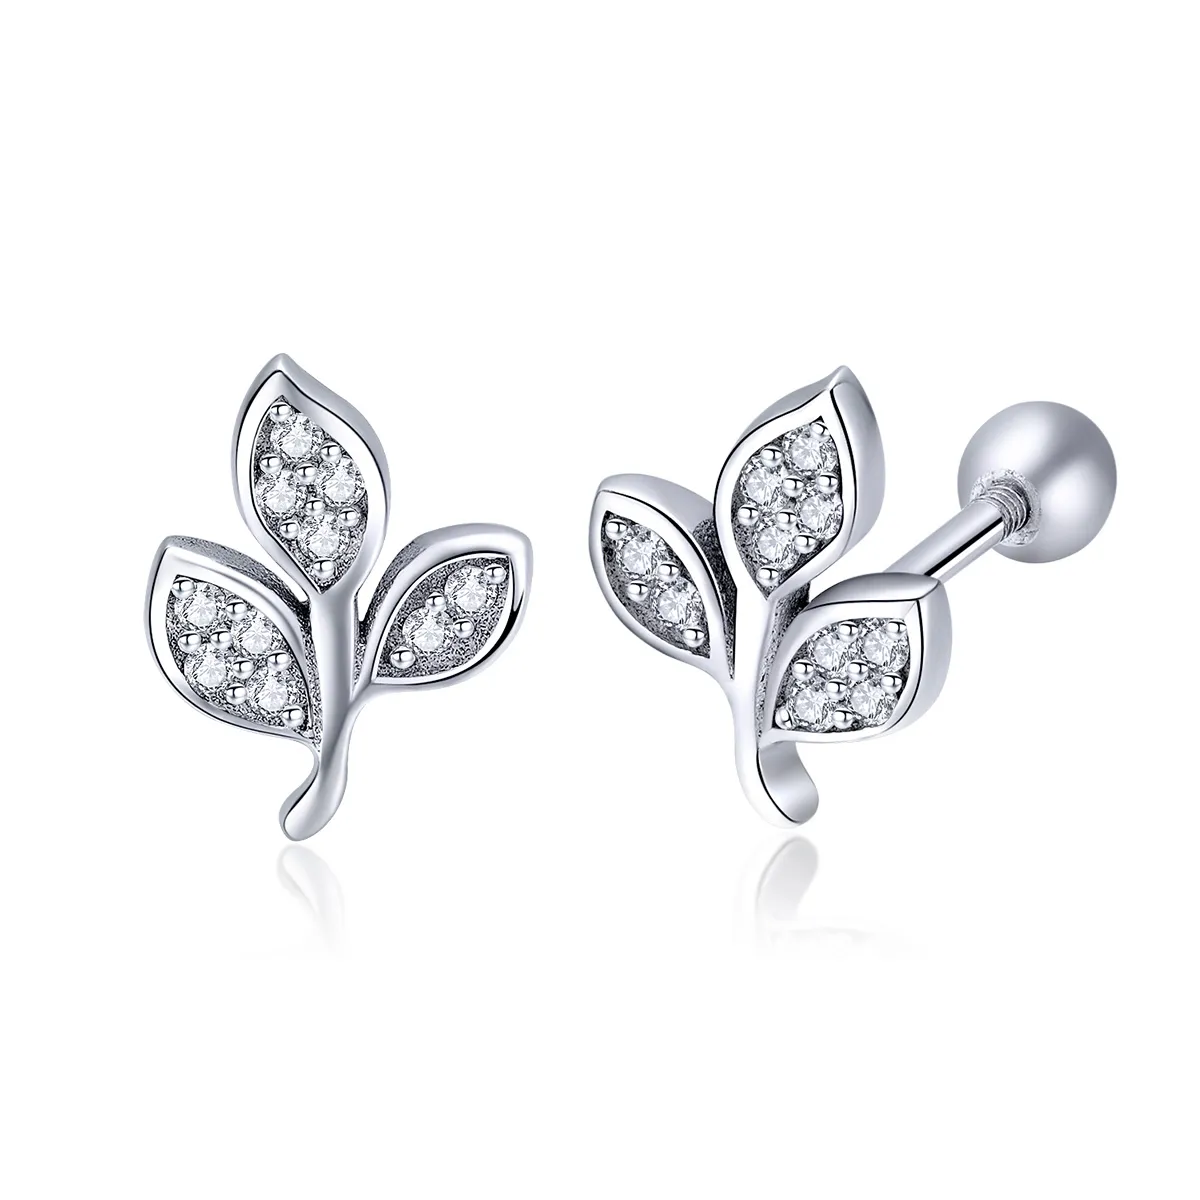 Pandora Style Listening to The Leaves Stud Earrings - SCE431